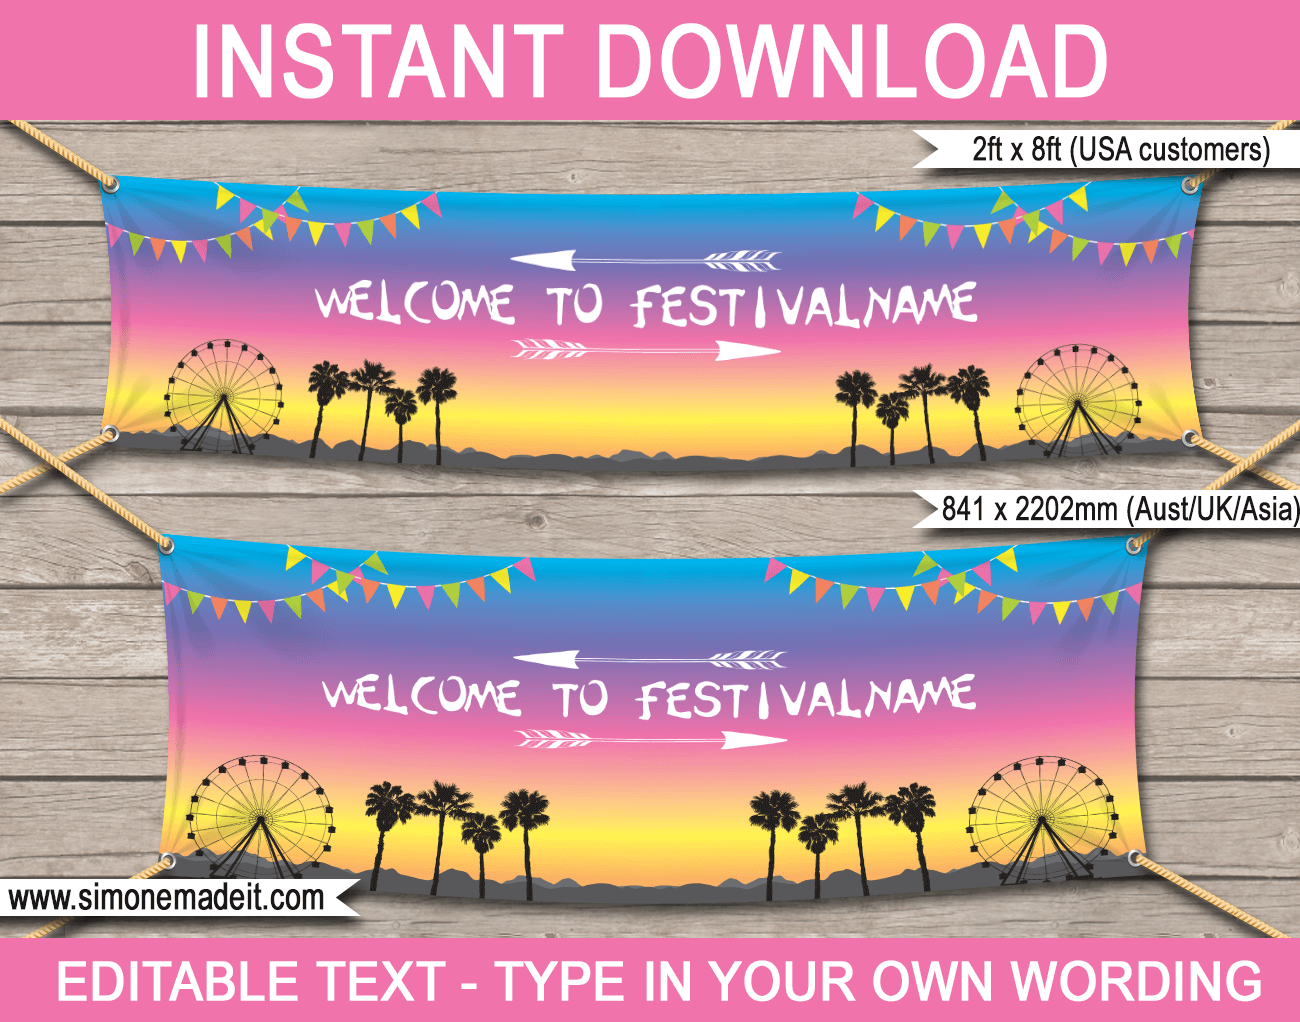 Printable Festival Party Welcome Banner | Large Size | Outdoor Sign | Festival Party Decorations | Birthday Party Theme | Kidchella, Festival, Fete, Gala, Fair, Carnival | Editable DIY Template | INSTANT DOWNLOAD via SIMONEmadeit.com